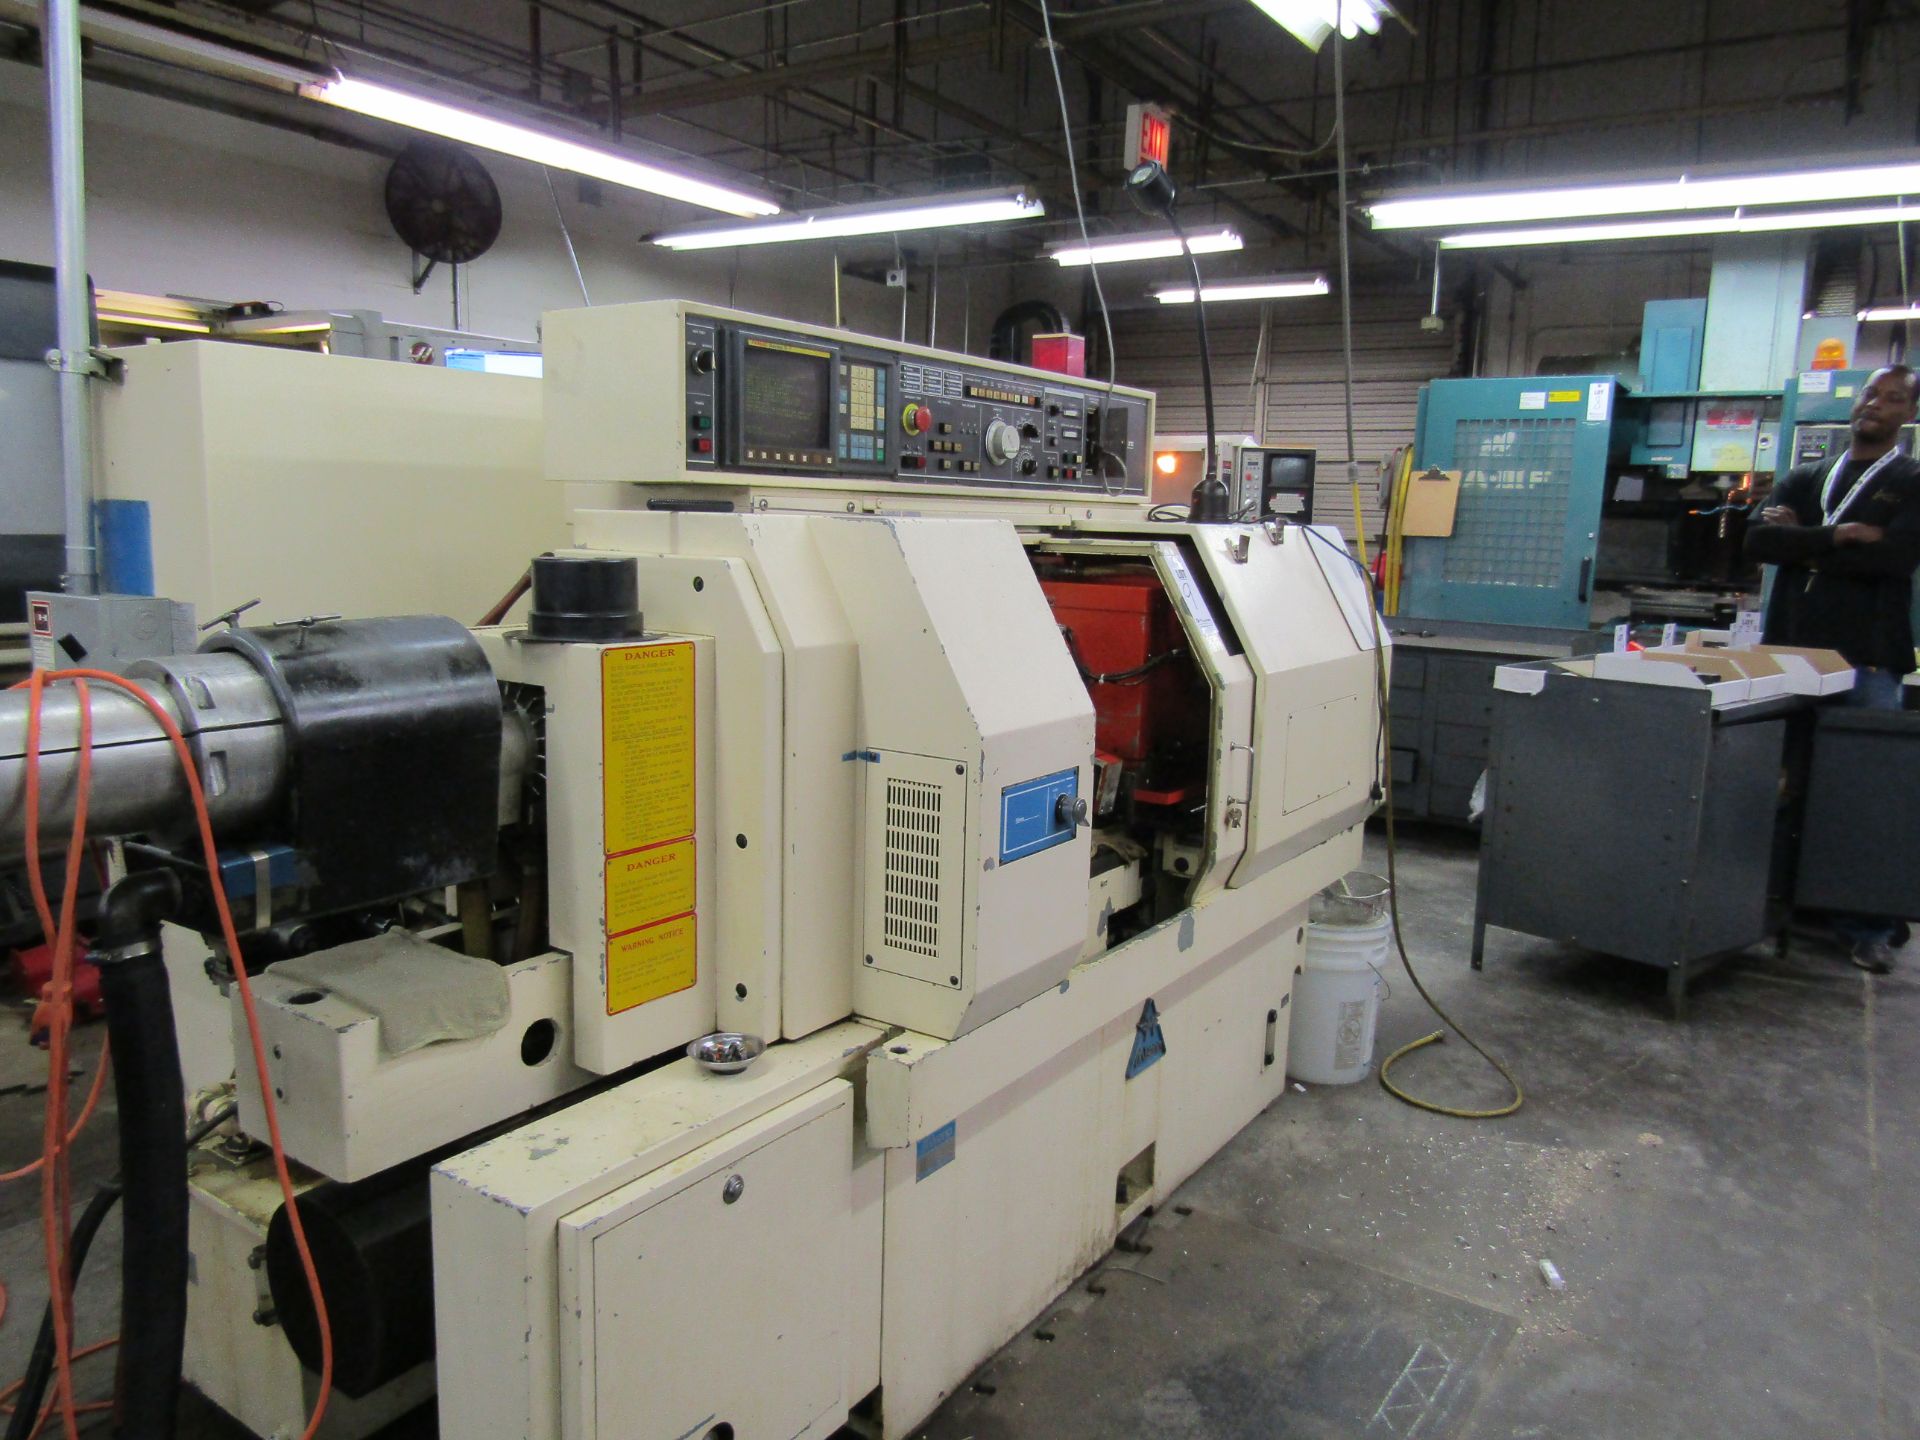 MIYANO BNC-34S CNC TURNING CENTER, SUB SPINDLE 4" CHUCK, 10 TOOL ATC, WITH TOOLING, FANUC SERIES - Image 7 of 9